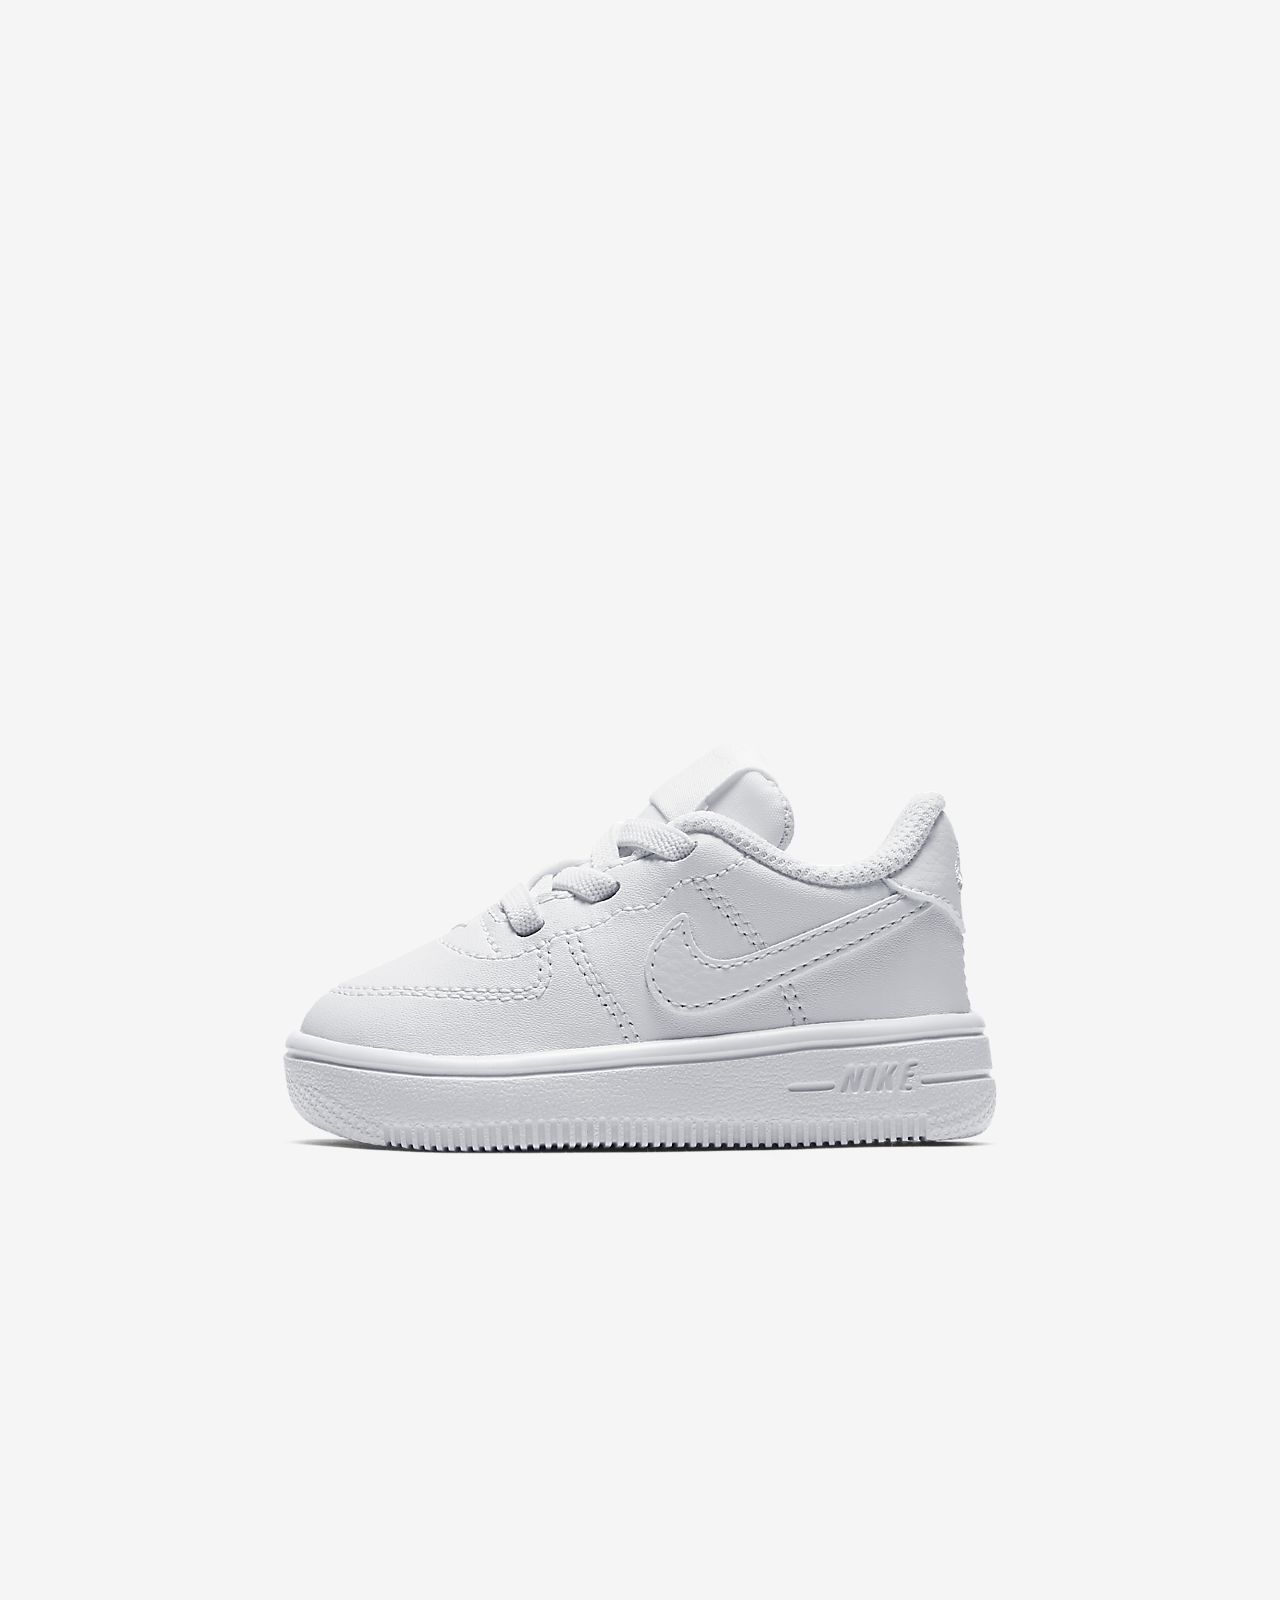 Nike Air Force 1 Infant in White